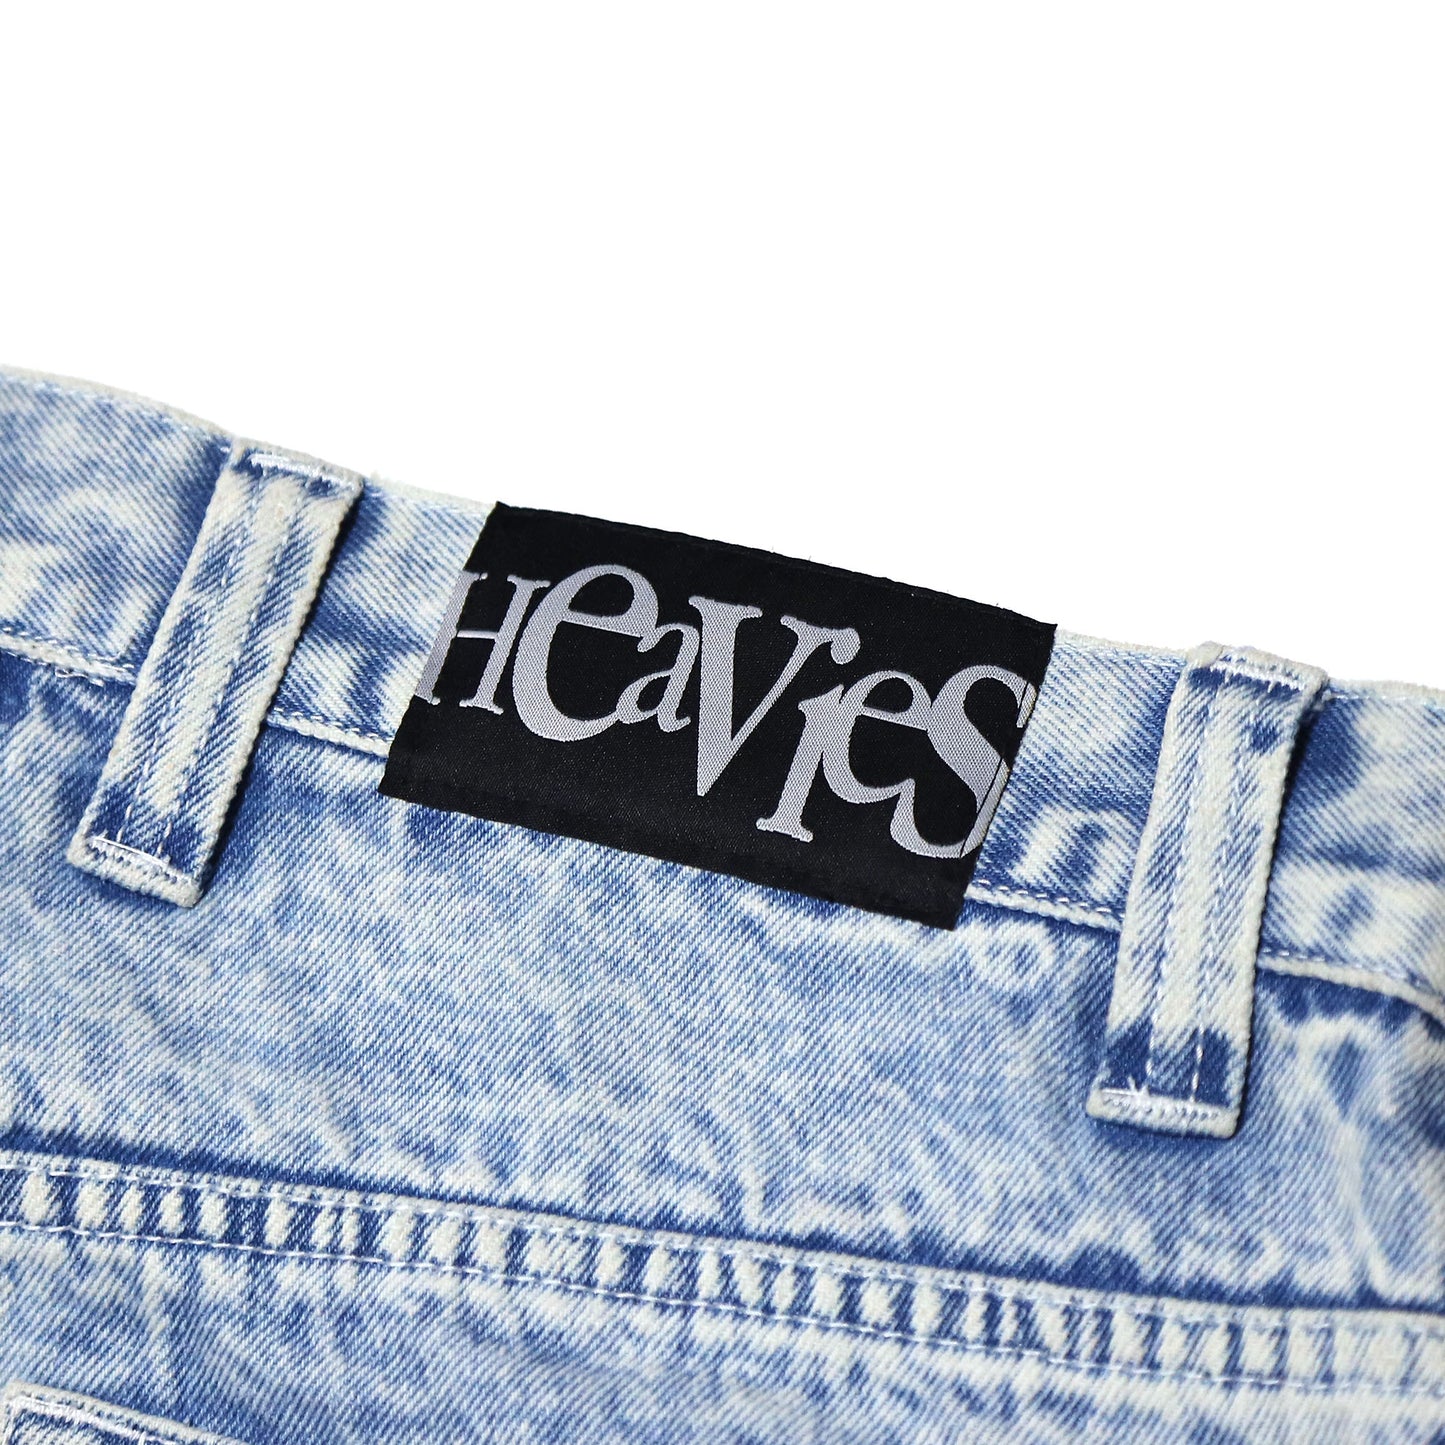 [FREE SHIPPING] MOTO-BUNKA X HEAVIES - Collaboration Jeans/Chemical Washed Light Blue